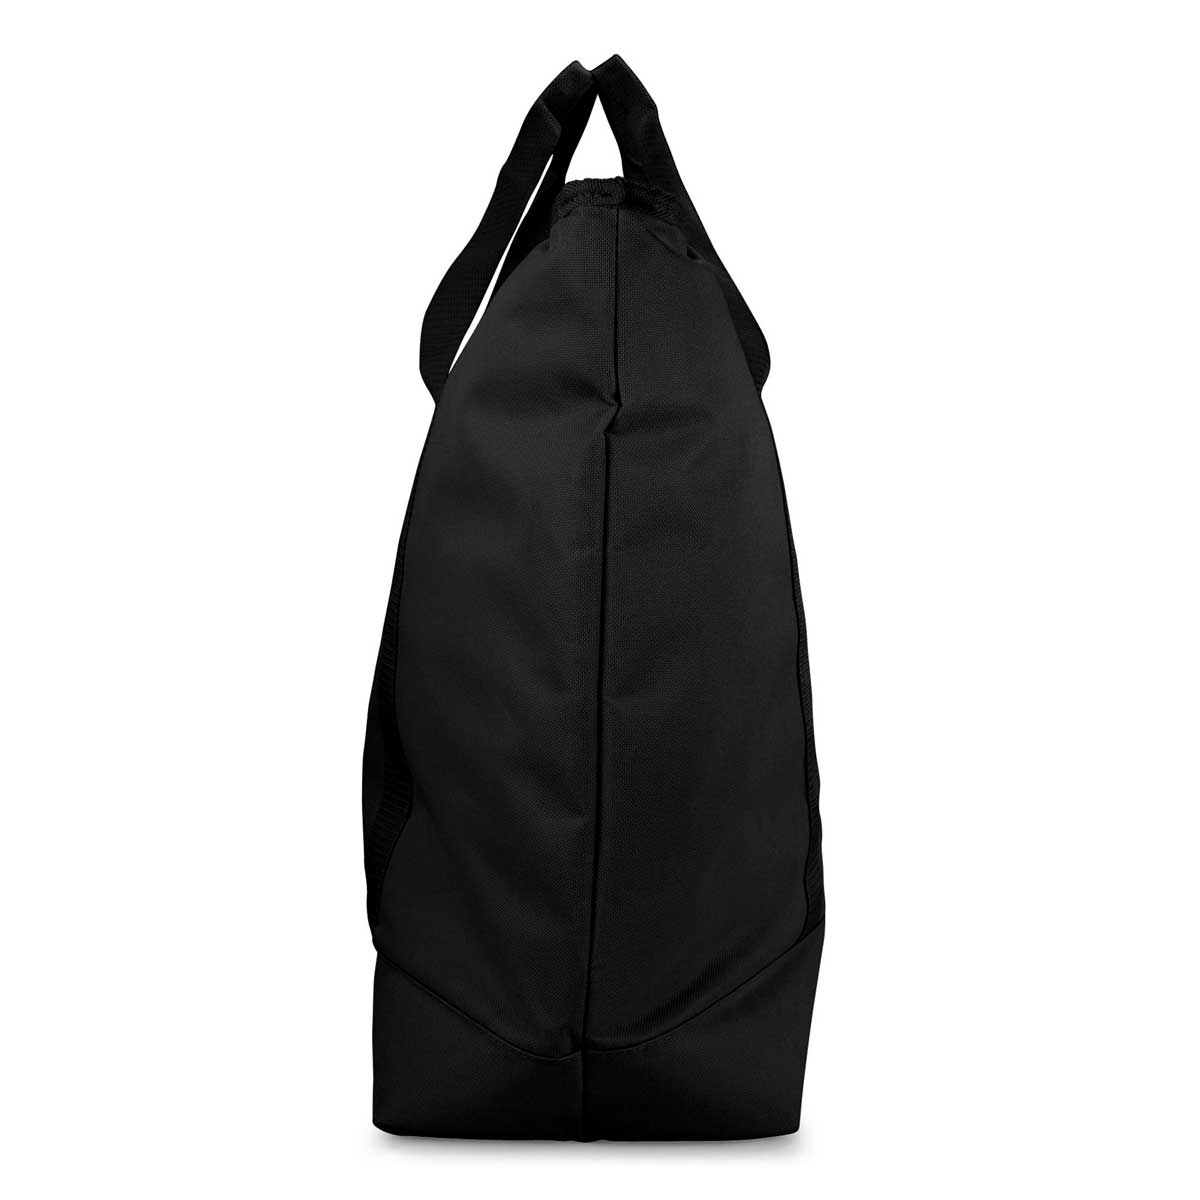 DALIX Large Tote Cooler Bag Insulated Thermal Shopping Tote